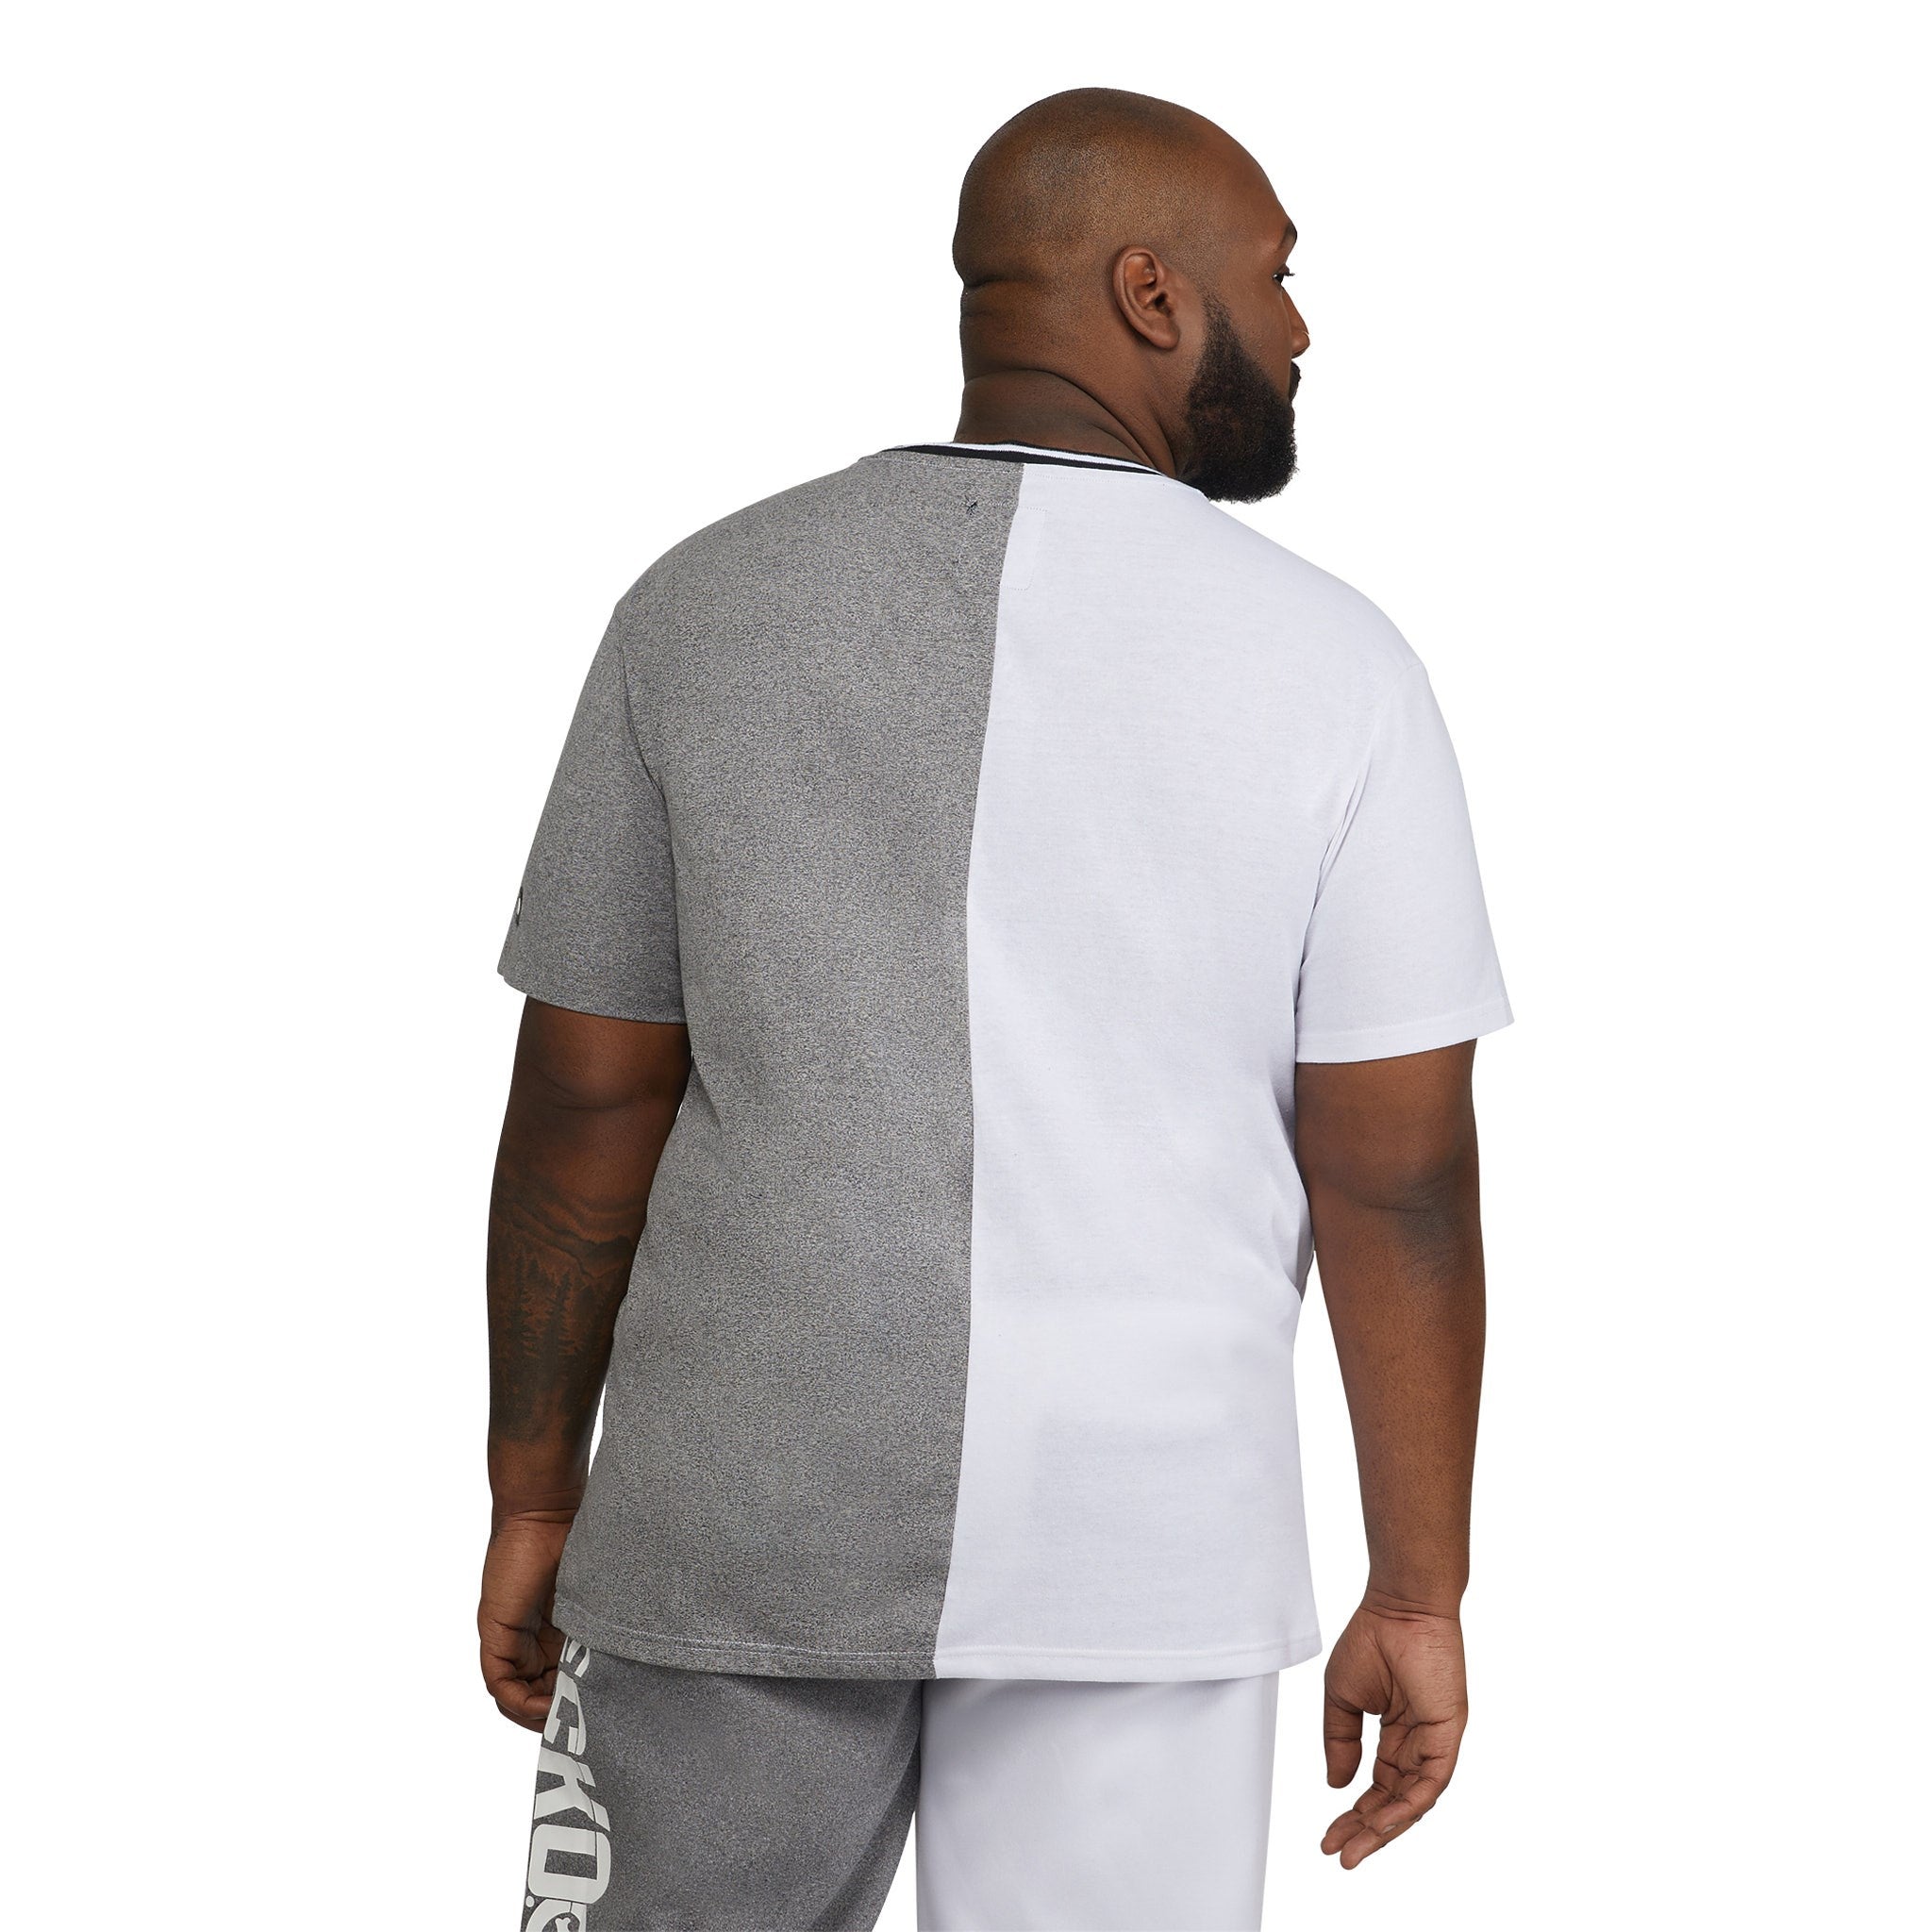 Division 1 Short Sleeve Knit Tee